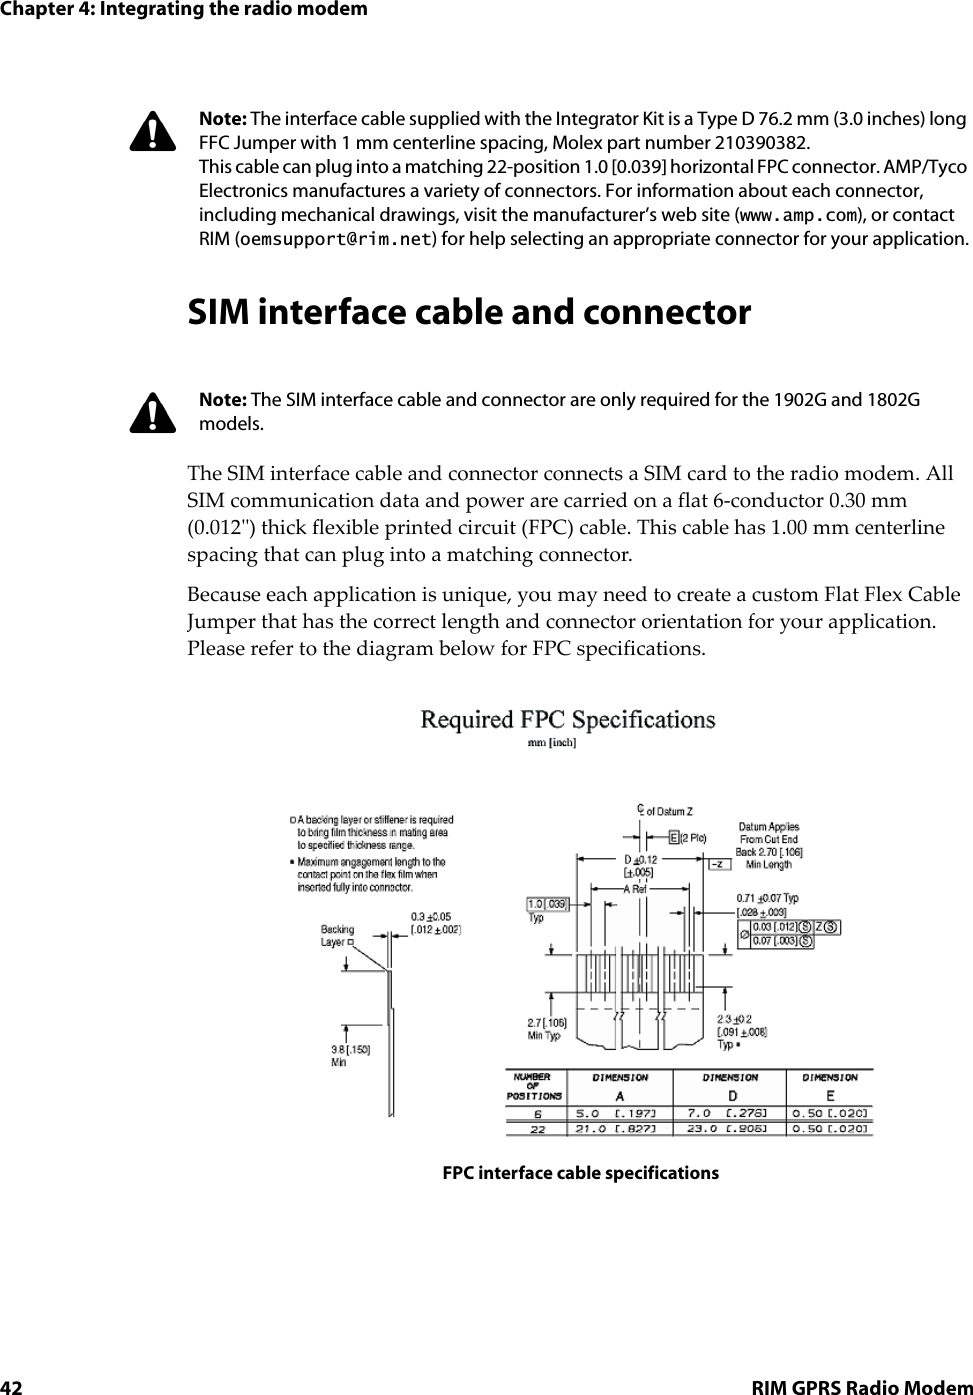 Chapter 4: Integrating the radio modem42 RIM GPRS Radio ModemSIM interface cable and connectorThe SIM interface cable and connector connects a SIM card to the radio modem. All SIM communication data and power are carried on a flat 6-conductor 0.30 mm (0.012&quot;) thick flexible printed circuit (FPC) cable. This cable has 1.00 mm centerline spacing that can plug into a matching connector. Because each application is unique, you may need to create a custom Flat Flex Cable Jumper that has the correct length and connector orientation for your application. Please refer to the diagram below for FPC specifications.FPC interface cable specificationsNote: The interface cable supplied with the Integrator Kit is a Type D 76.2 mm (3.0 inches) long FFC Jumper with 1 mm centerline spacing, Molex part number 210390382.This cable can plug into a matching 22-position 1.0 [0.039] horizontal FPC connector. AMP/Tyco Electronics manufactures a variety of connectors. For information about each connector, including mechanical drawings, visit the manufacturer’s web site (www.amp.com), or contact RIM (oemsupport@rim.net) for help selecting an appropriate connector for your application.Note: The SIM interface cable and connector are only required for the 1902G and 1802G models.